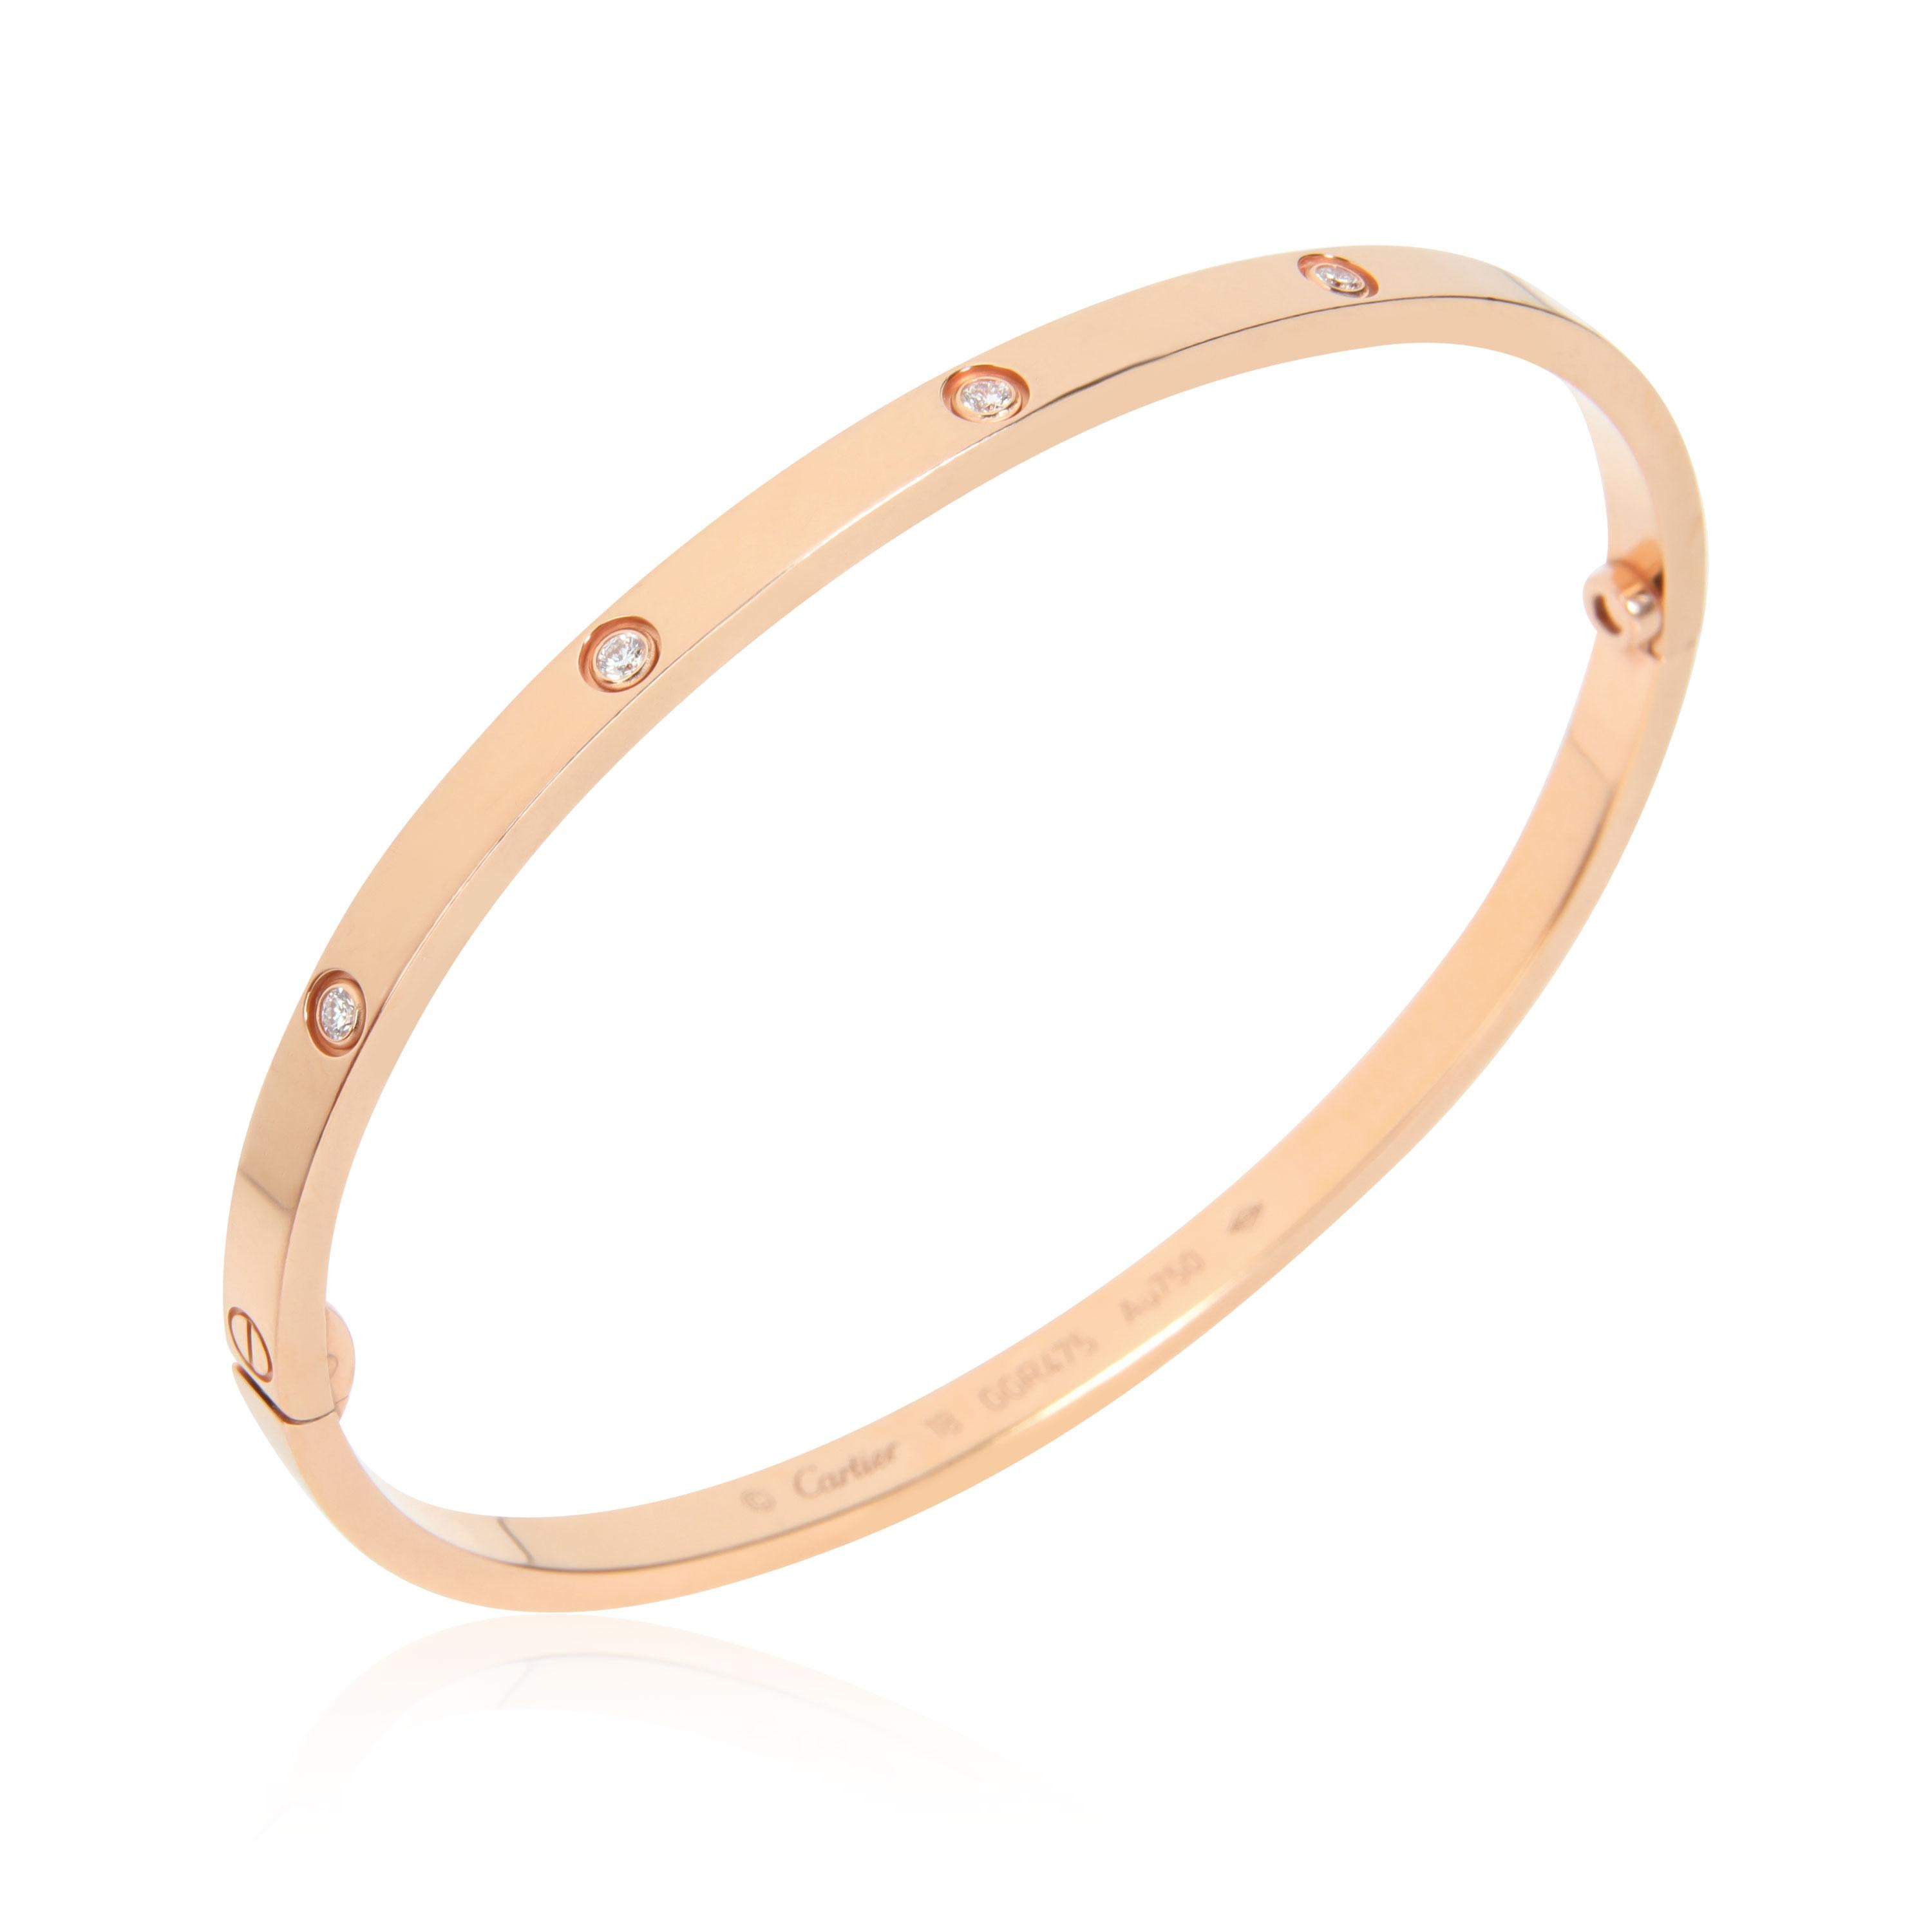 artier Love Diamond Bracelet in 18K Rose Gold 0.21 CTW

PRIMARY DETAILS
SKU: 111534
Listing Title: Cartier Love Diamond Bracelet in 18K Rose Gold 0.21 CTW
Condition Description: Retails for 8,900 USD. In excellent condition and recently polished.